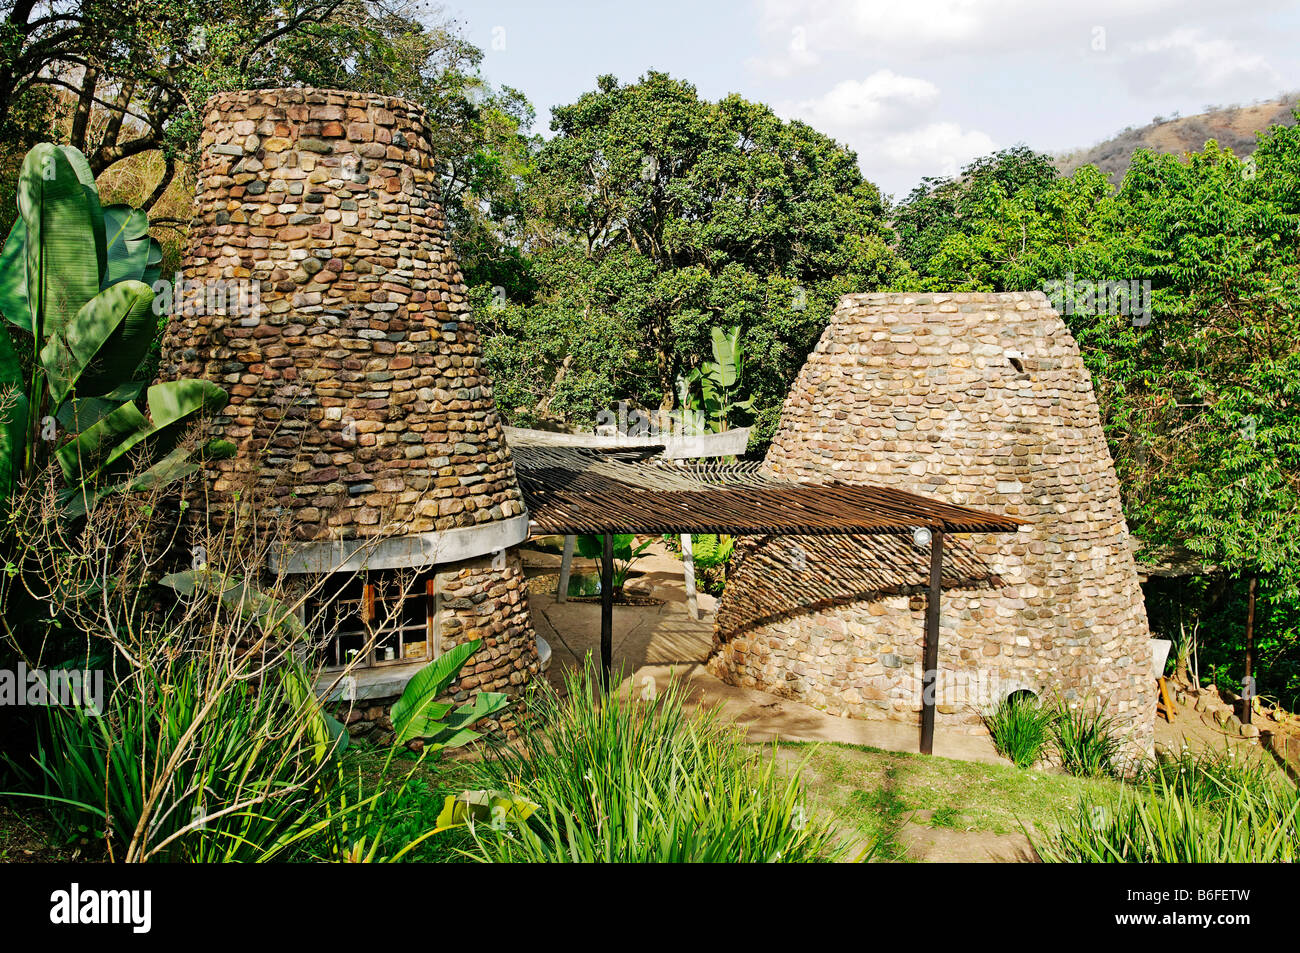 Hot springs bath house in Lilani valley built in an historic architectural style of Great Zimbabwe, Kwazulu-Natal, South Africa Stock Photo